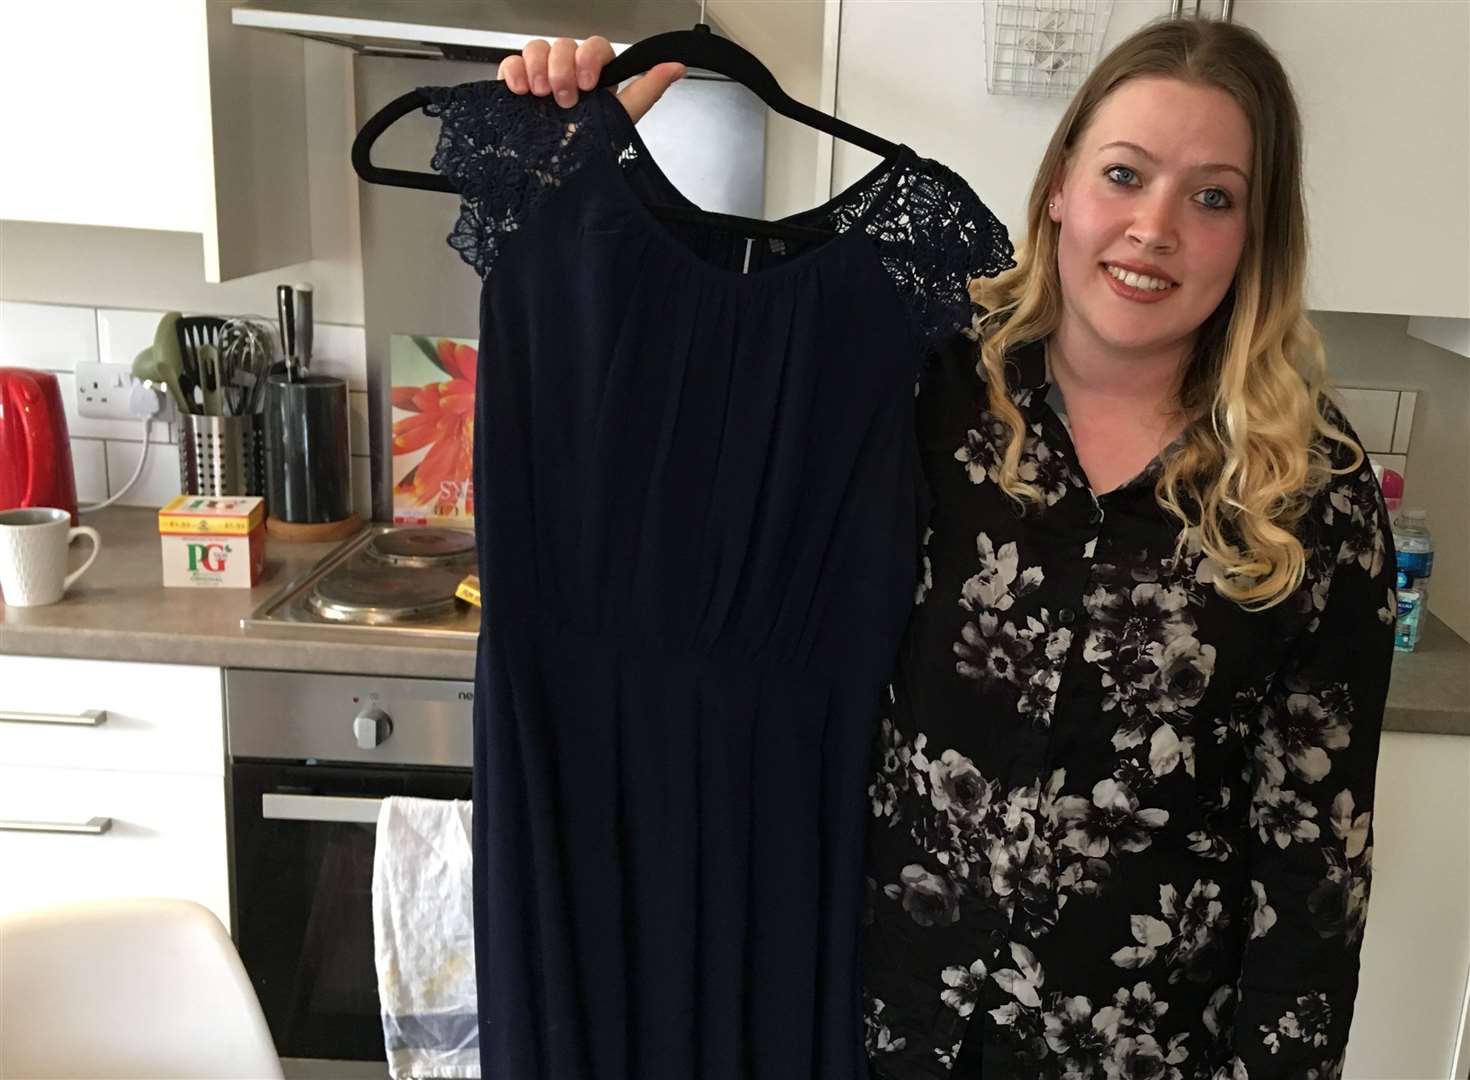 Some of Hannah’s notable successes include a dress which cost just 2p when a checkout malfunctioned